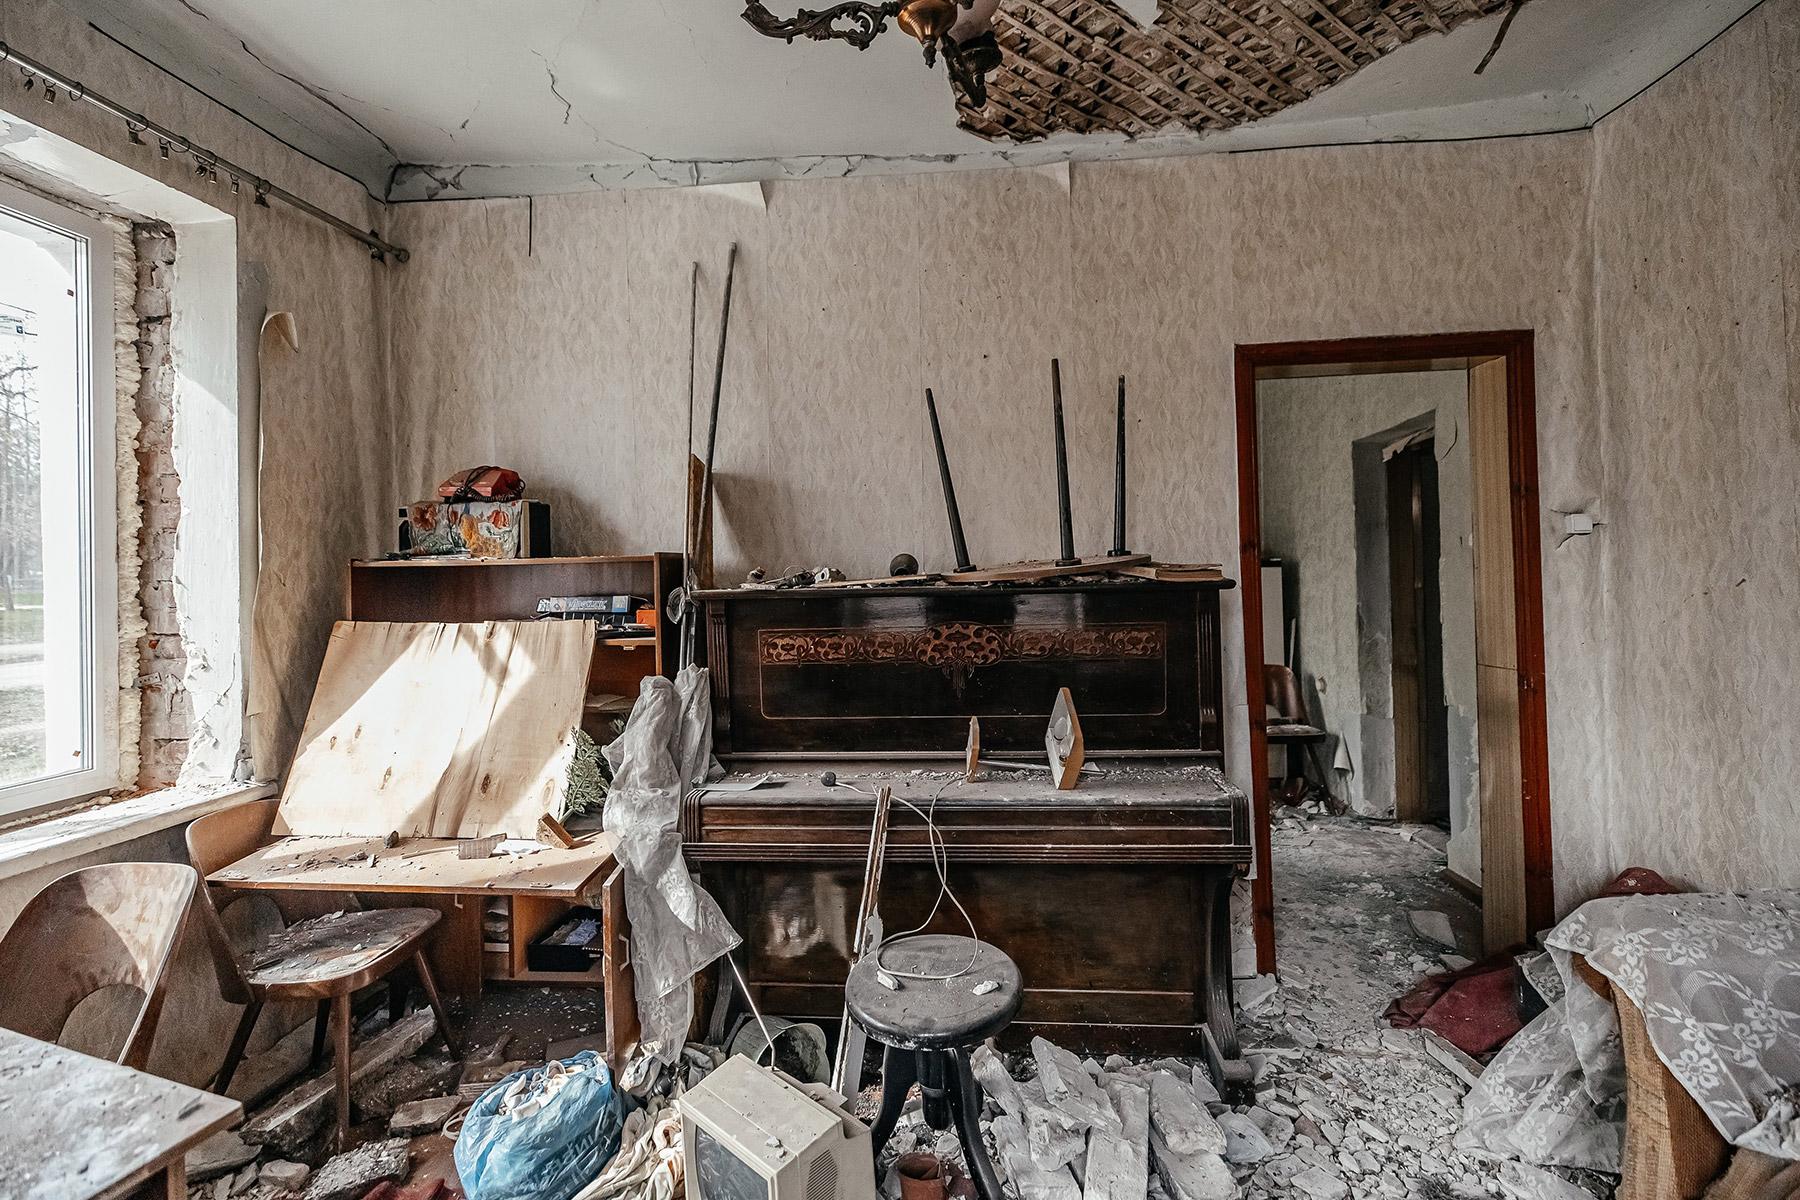 A living room in the Saltivka quarter, Kharkiv. The apartment blocks continue to be targeted by missiles. Photo: LWF/ Anantoliy Nazarenko